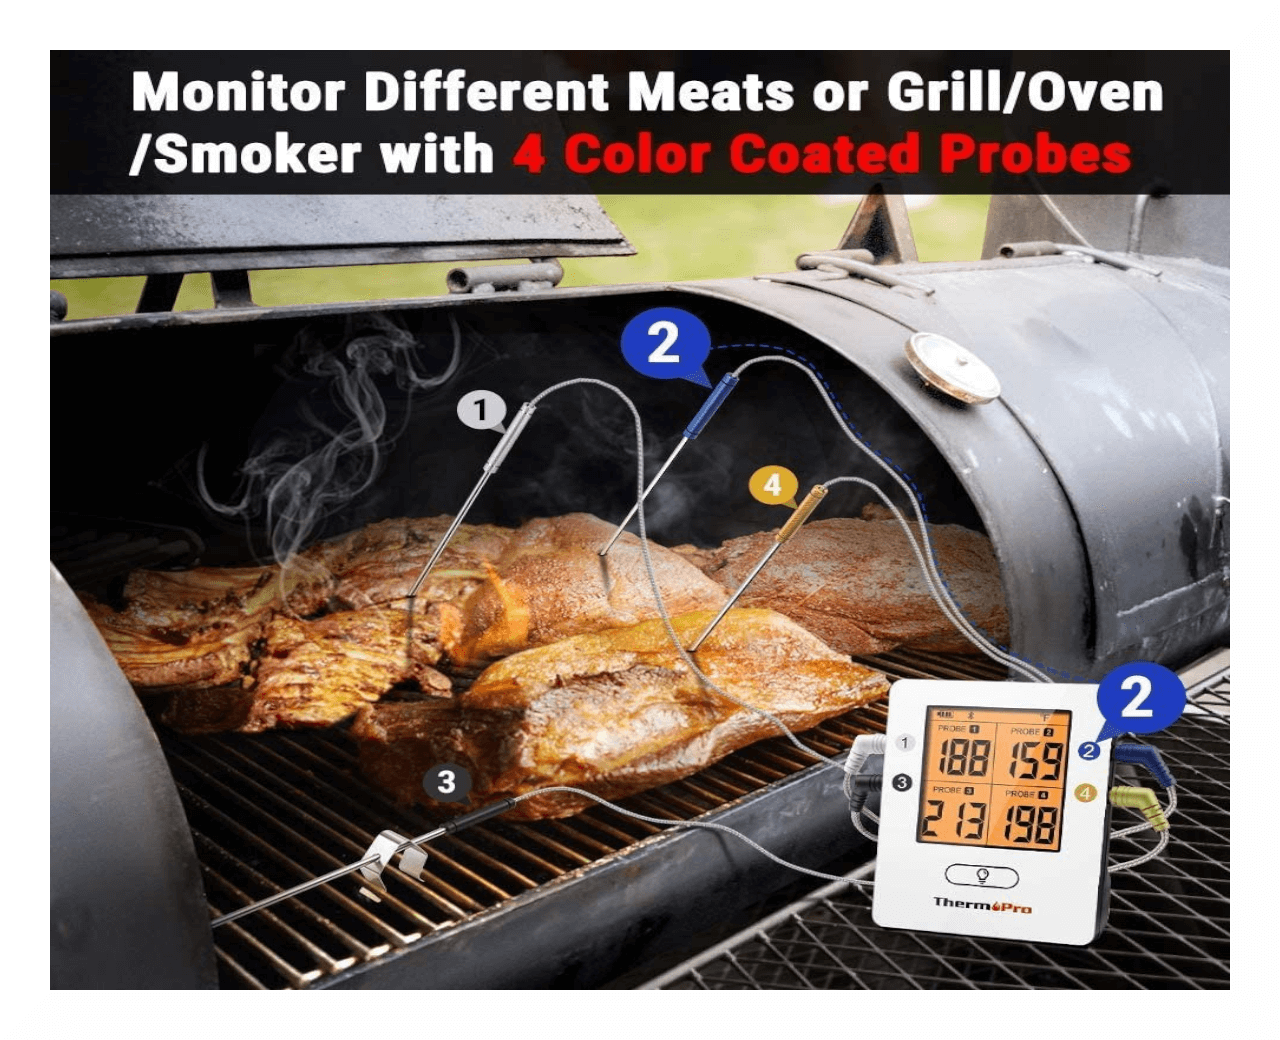 ThermoPro TP25 650FT Bluetooth Meat Thermometer with 4-Probes, Smart  Rechargeable Wireless Meat Thermometer for Grilling, Smoker, Oven, Kitchen,  BBQ